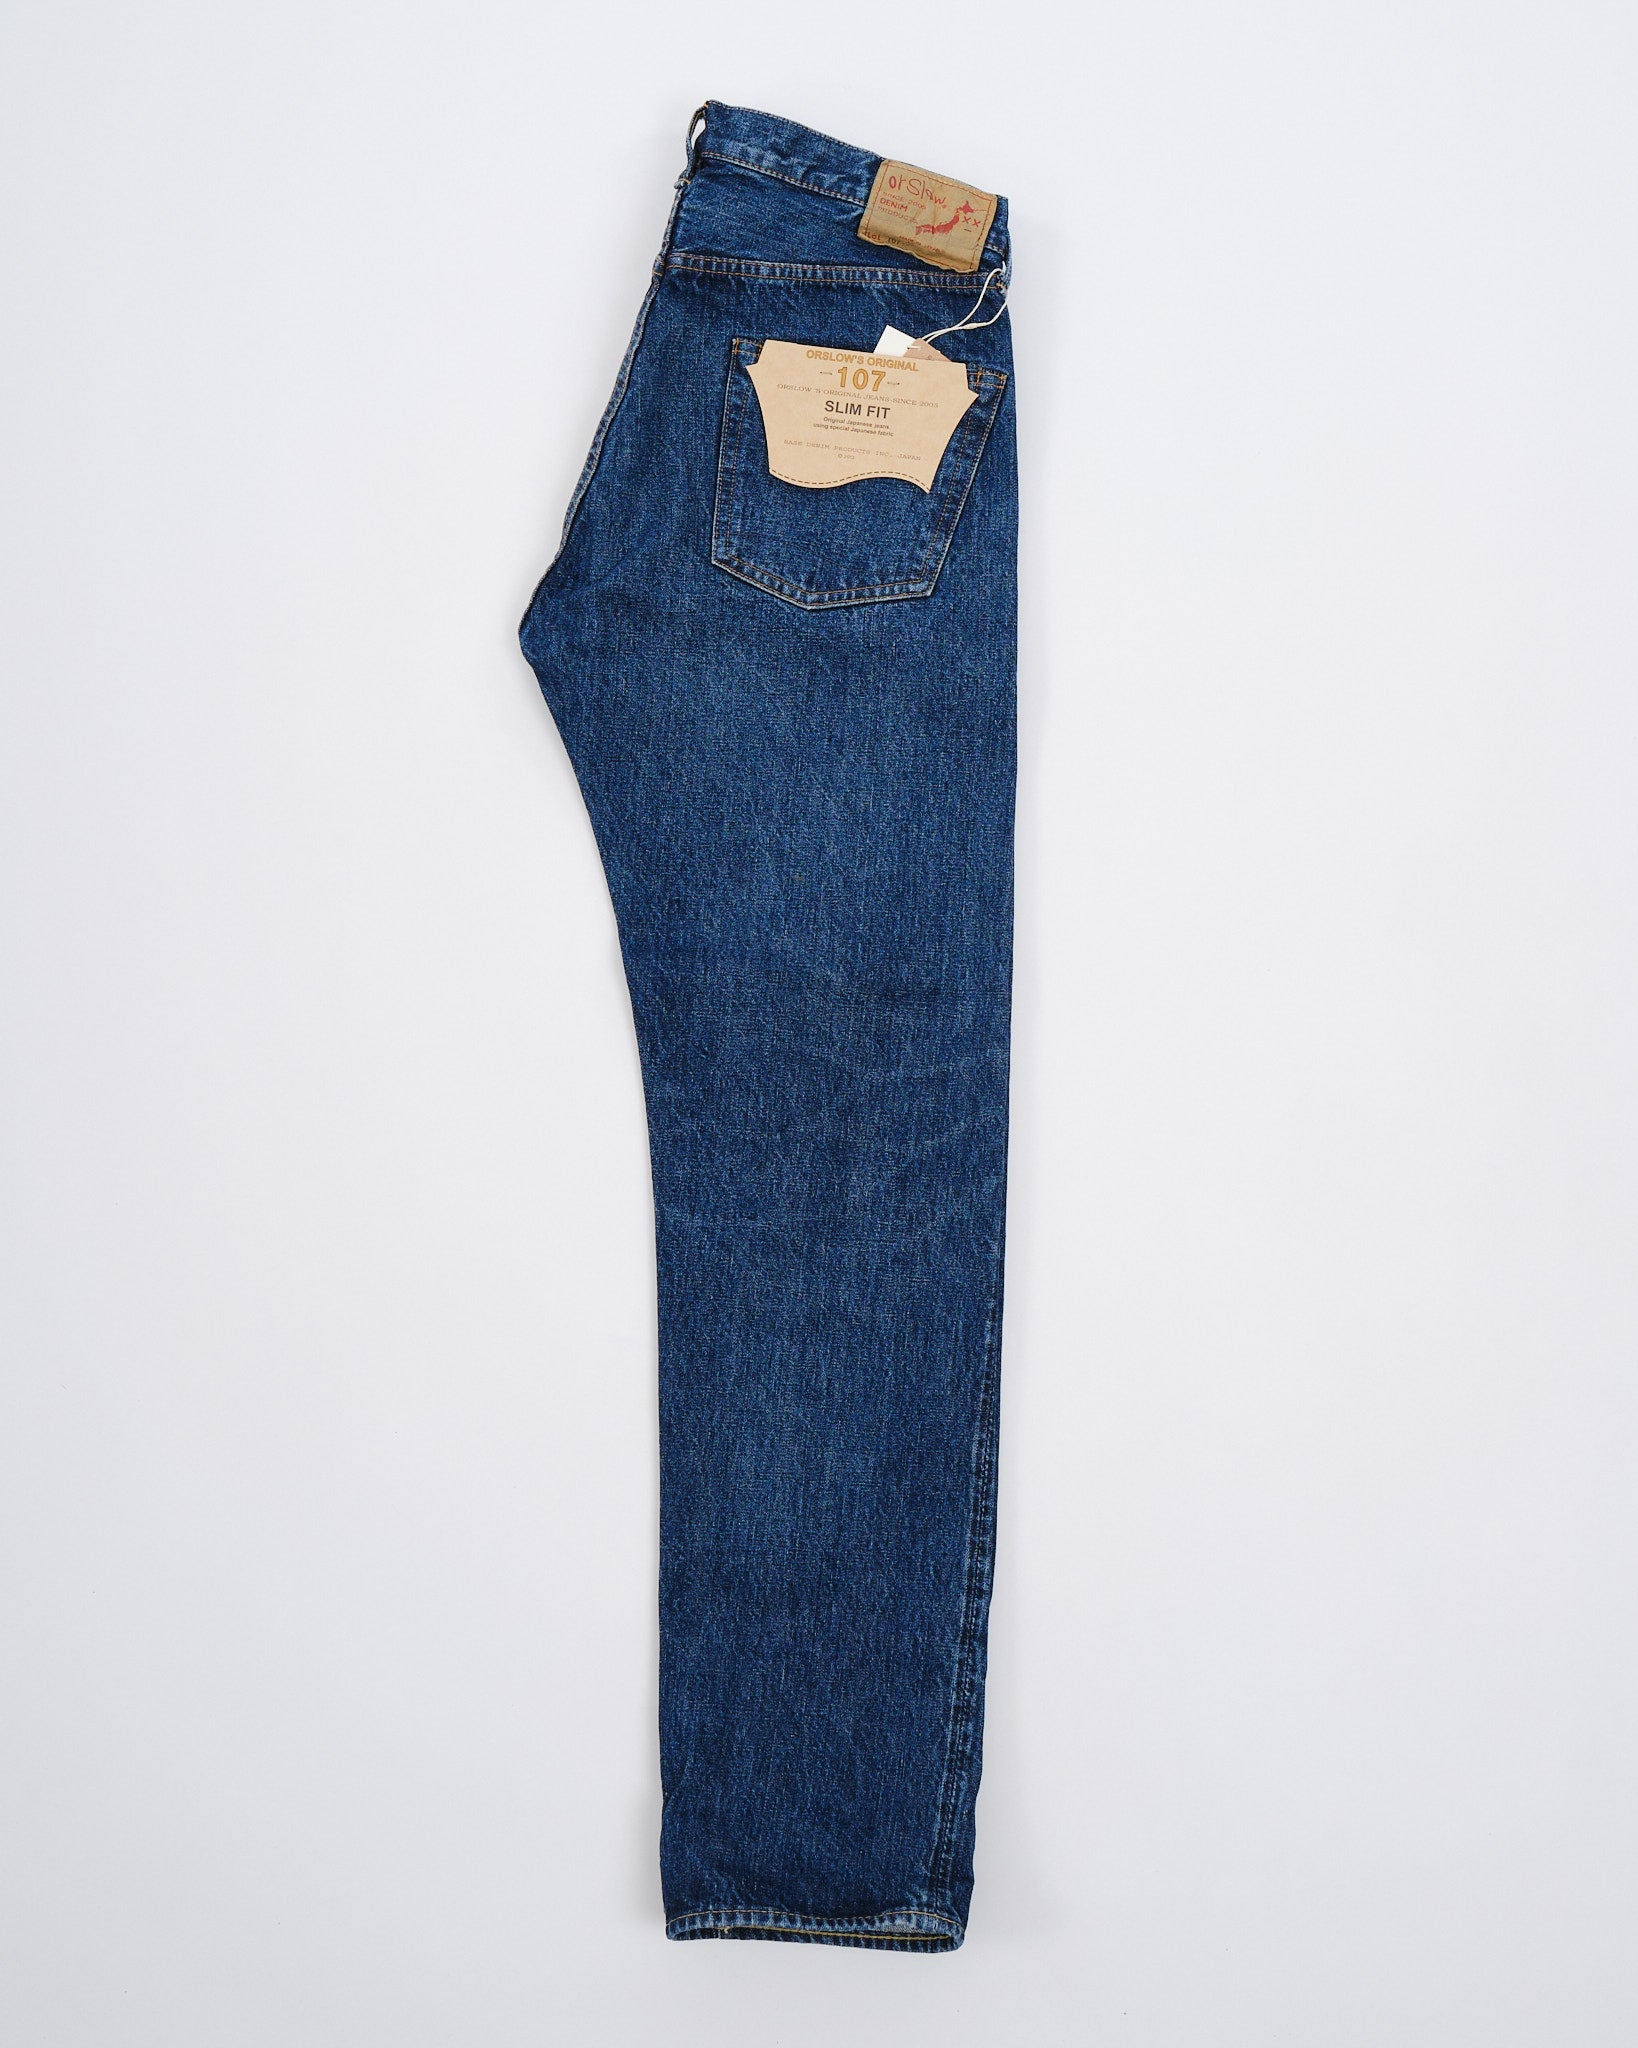 107 Ivy Fit Selvedge Denim Jeans 2 Year Wash - Meadow